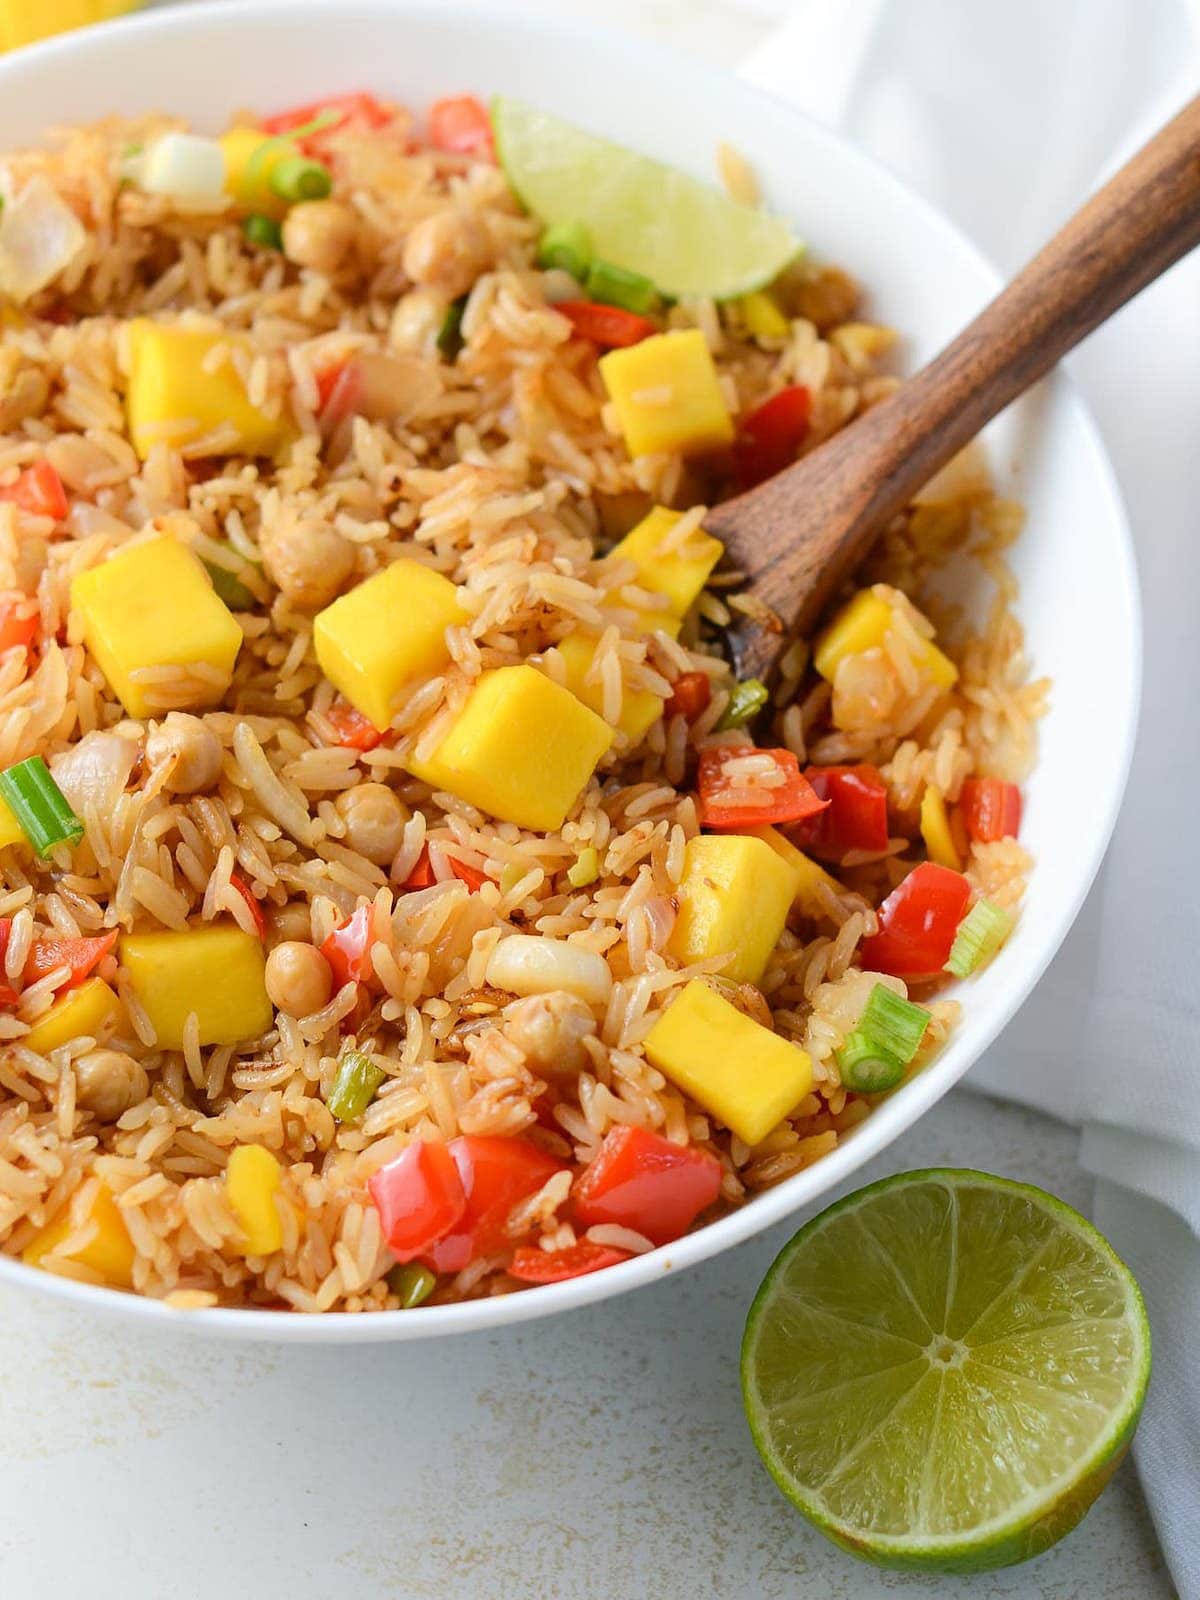 This is a photo of mango fried rice with a spoon in it.